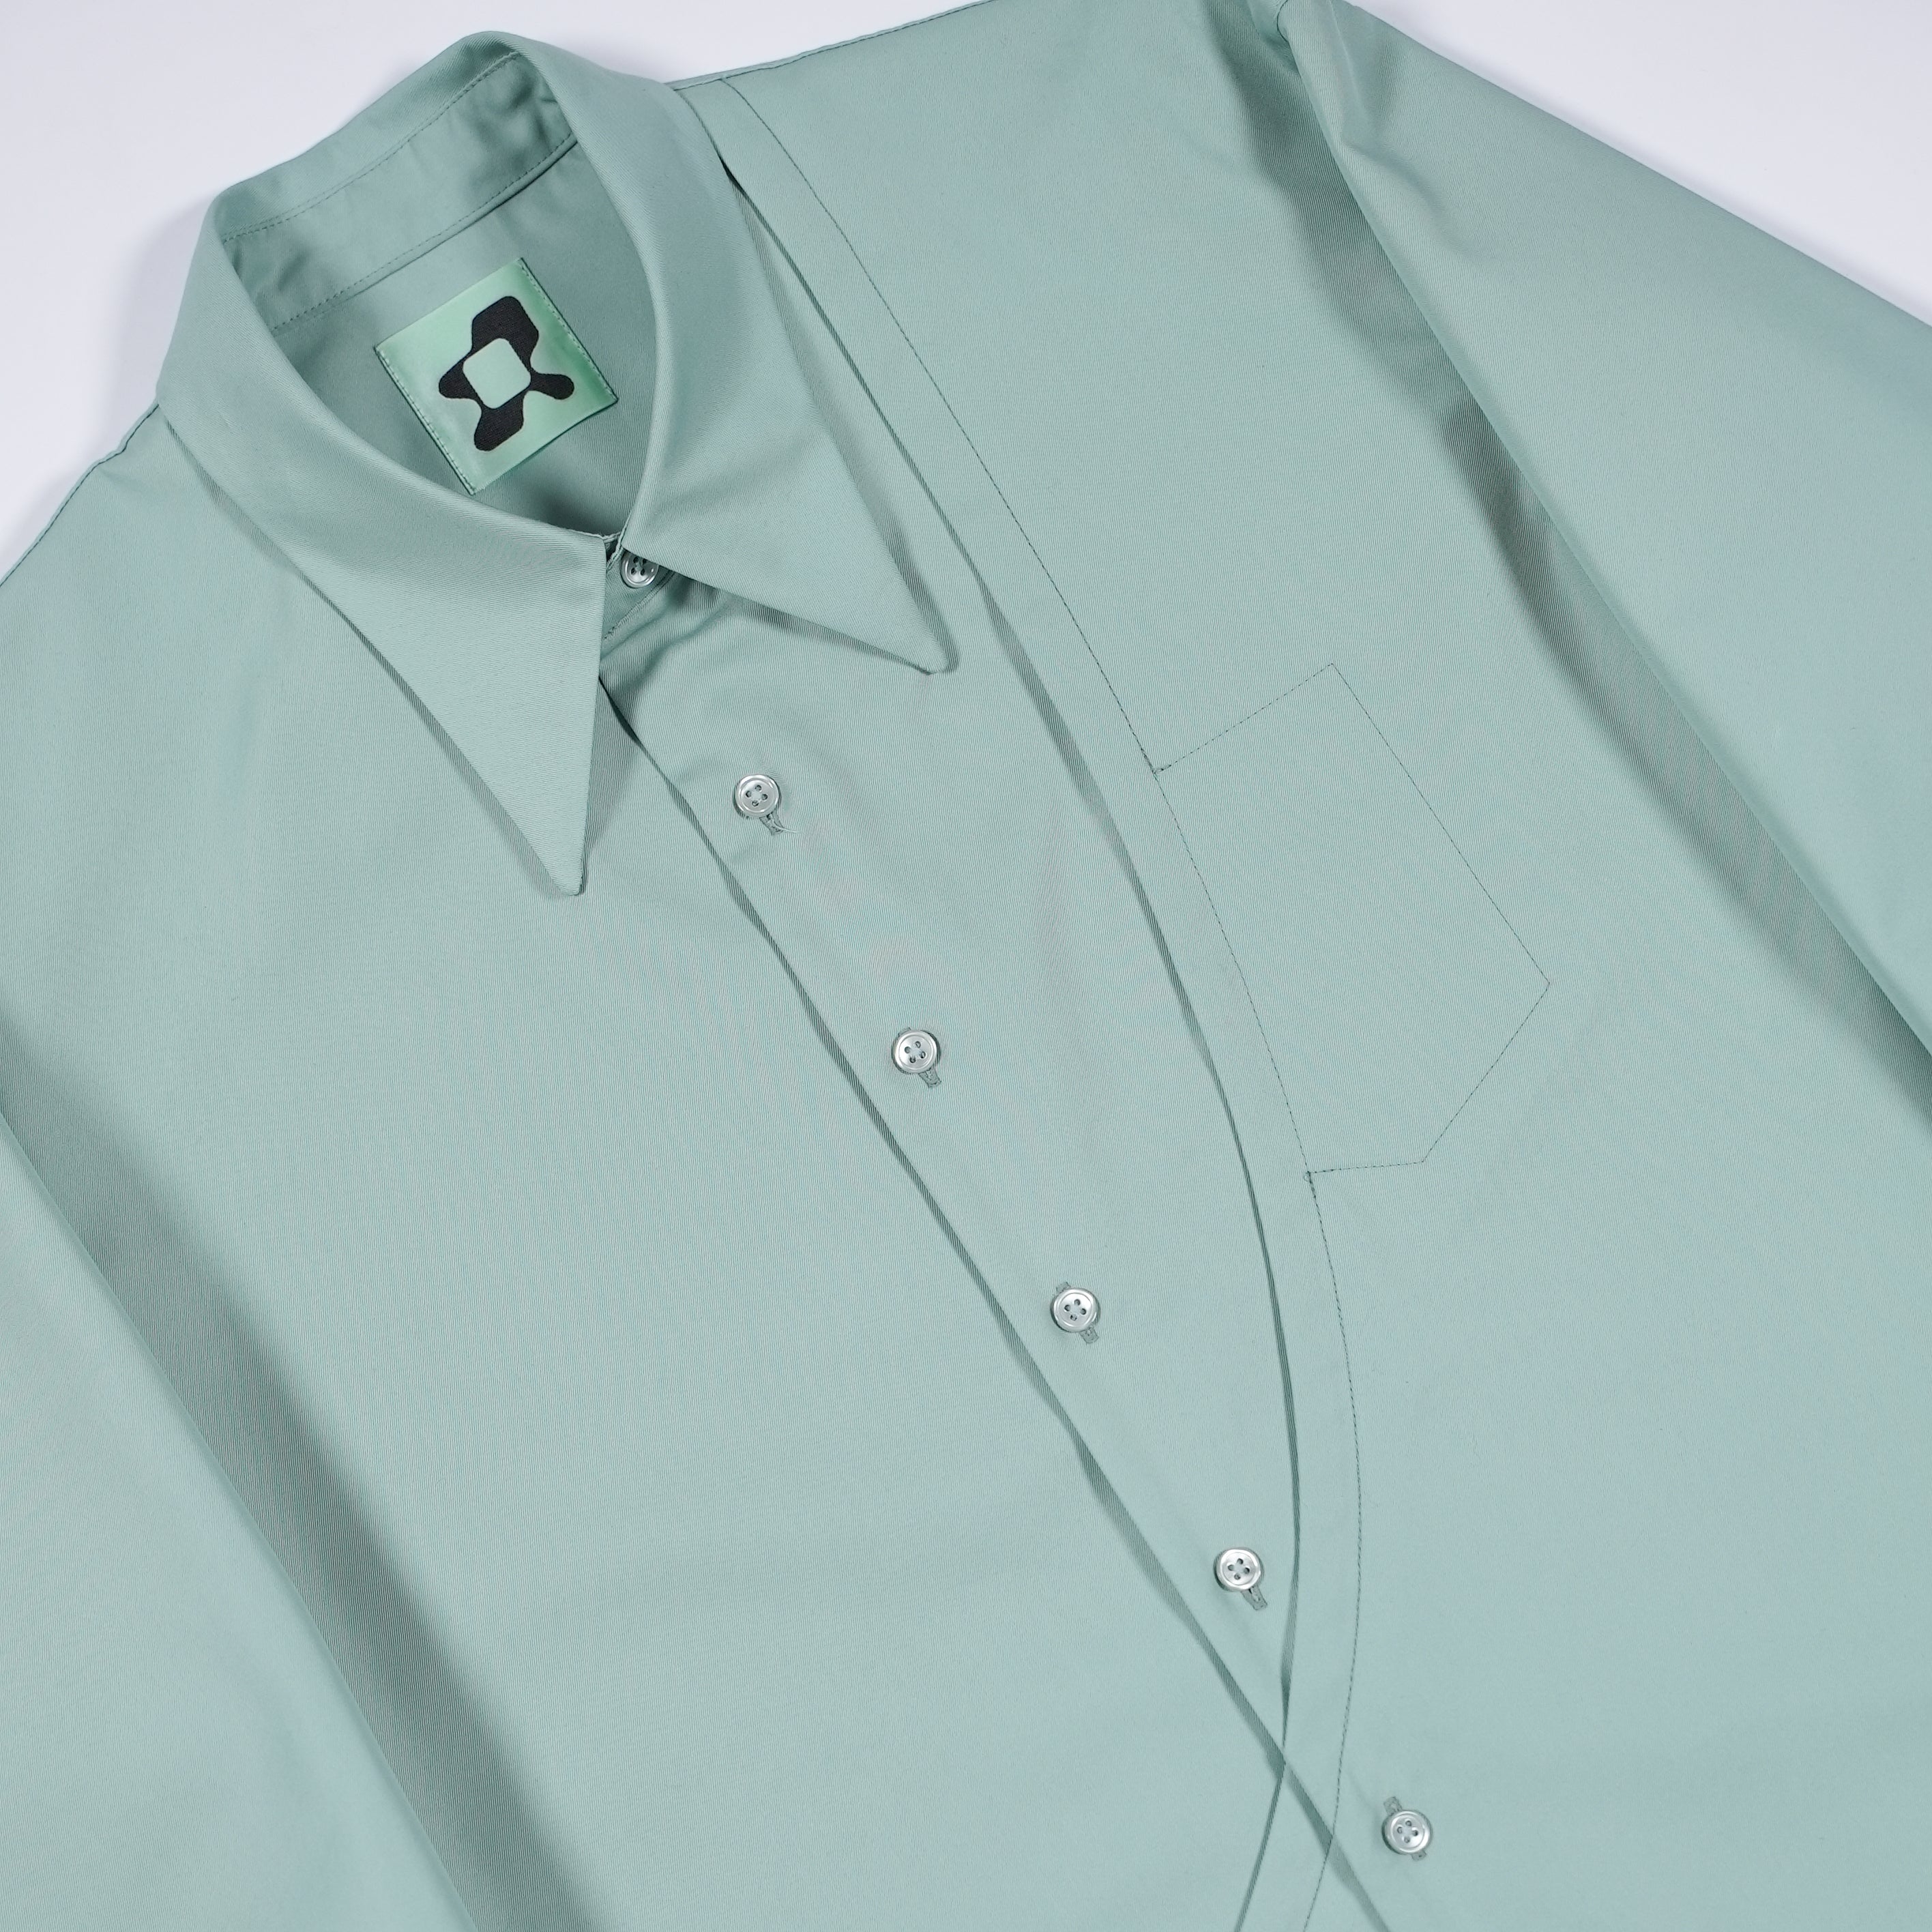 ours strong 002 green shirt jacket